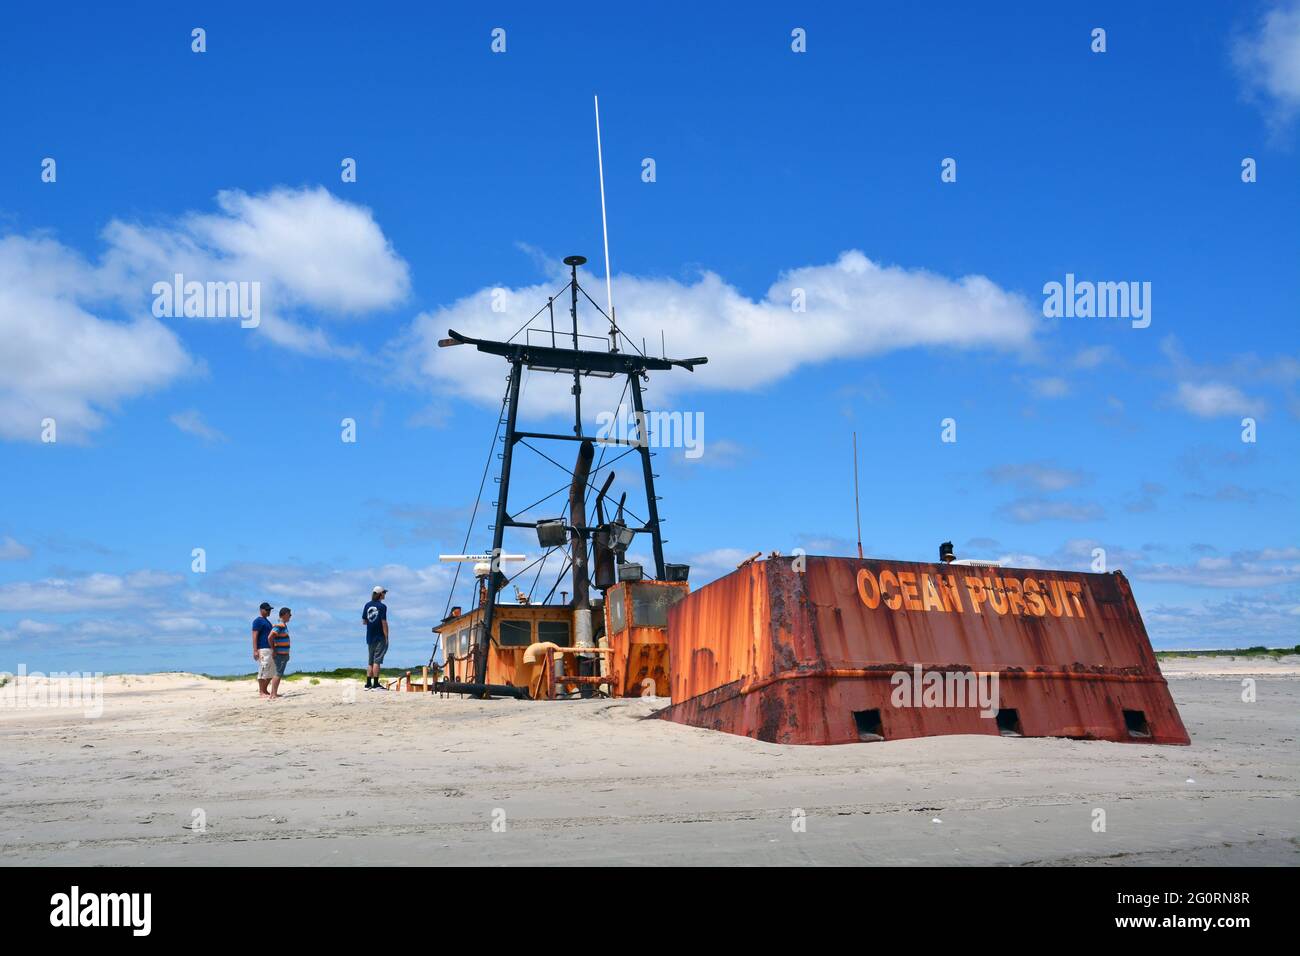 The fishing trawler Ocean Pursuit stranded on the beach at Oregon Inlet, Nags Head, NC March 1, 2020 and over a year later is sinking into the beach. Stock Photo